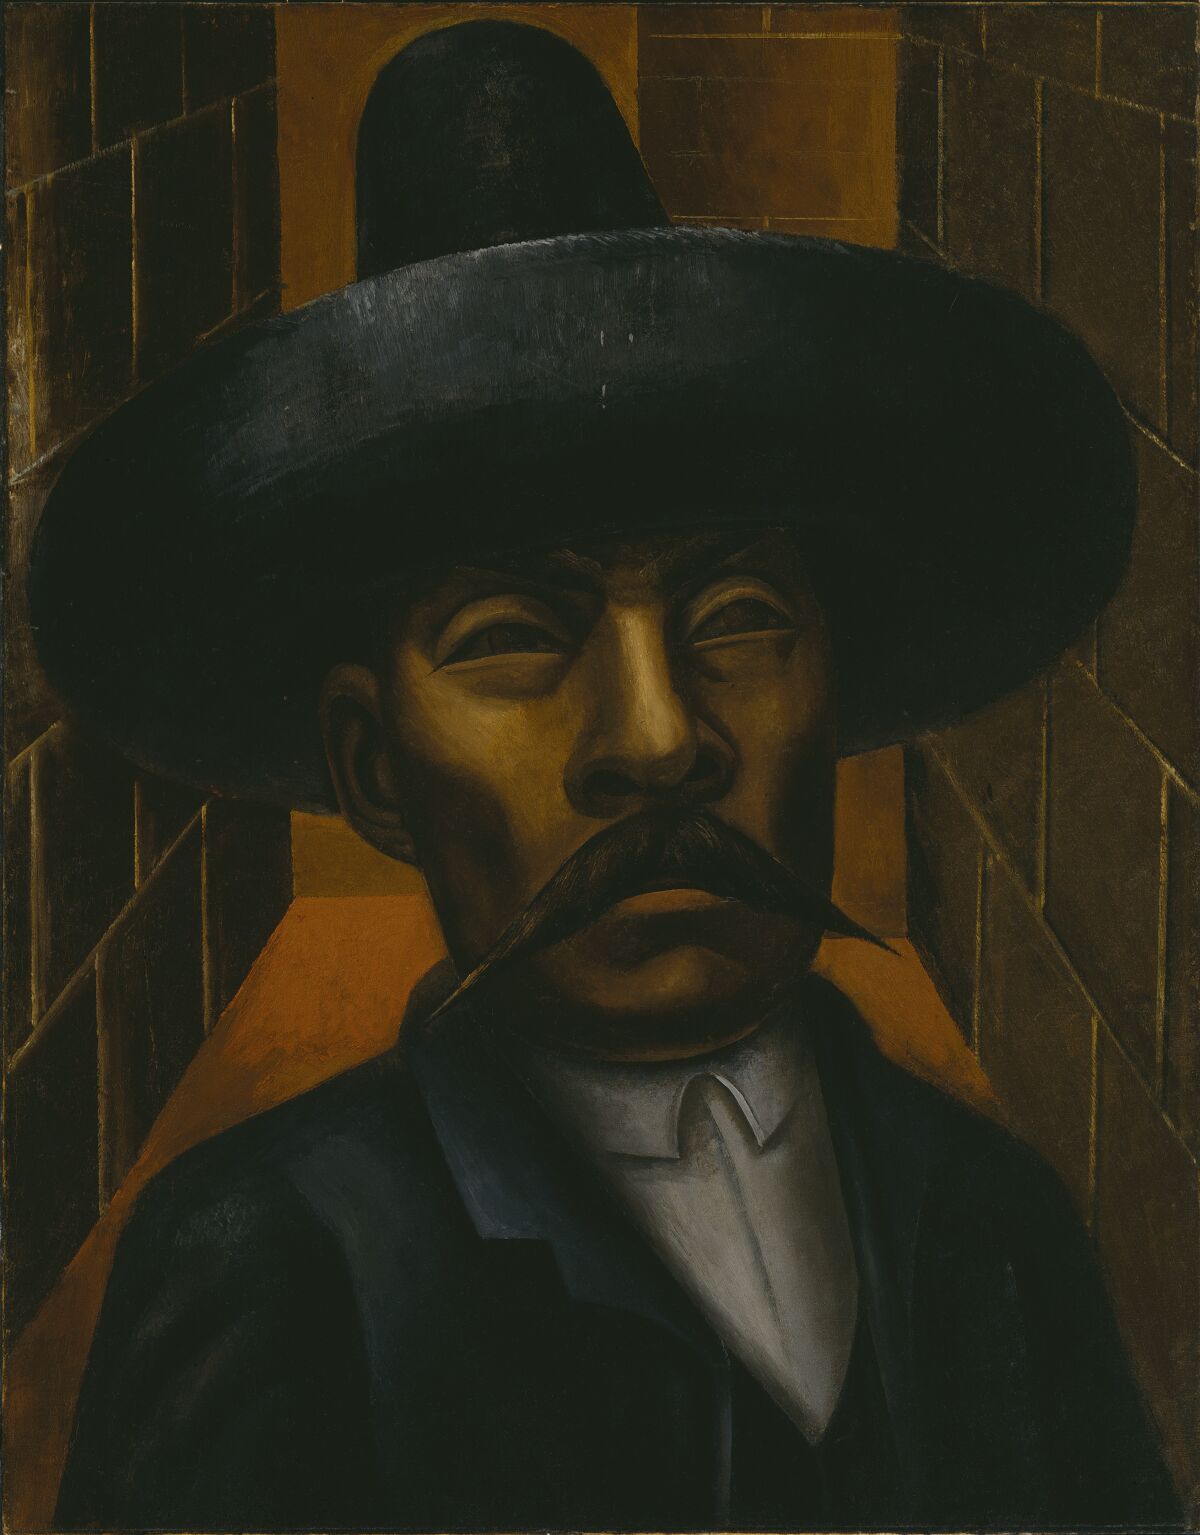 A painting shows Emiliano Zapato with a steely face reminiscent of pre-Columbian Mesoamerican sculpture.